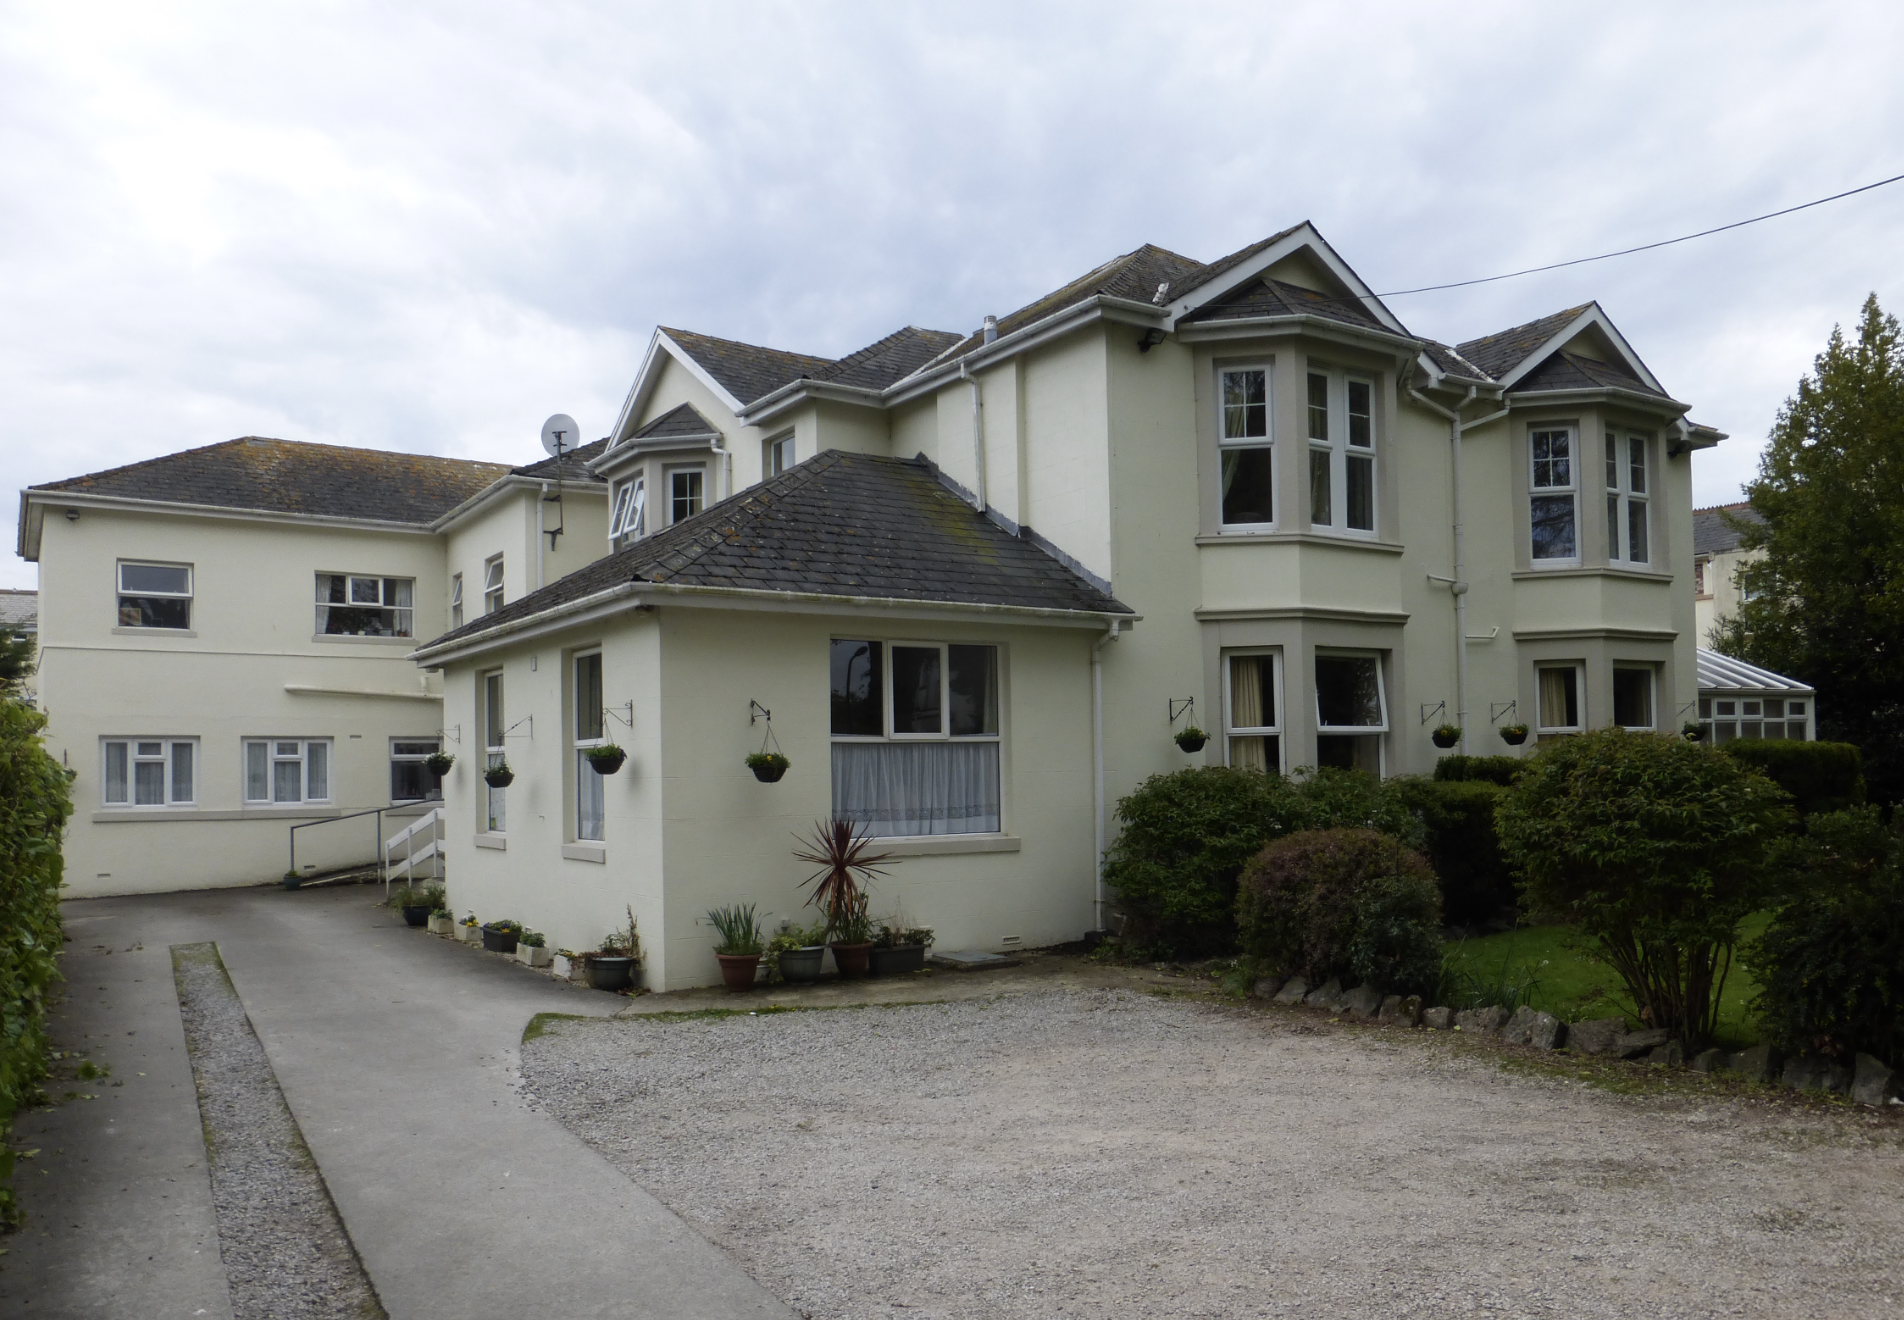 Exterior of Lorna House care home in Torquay, Devon